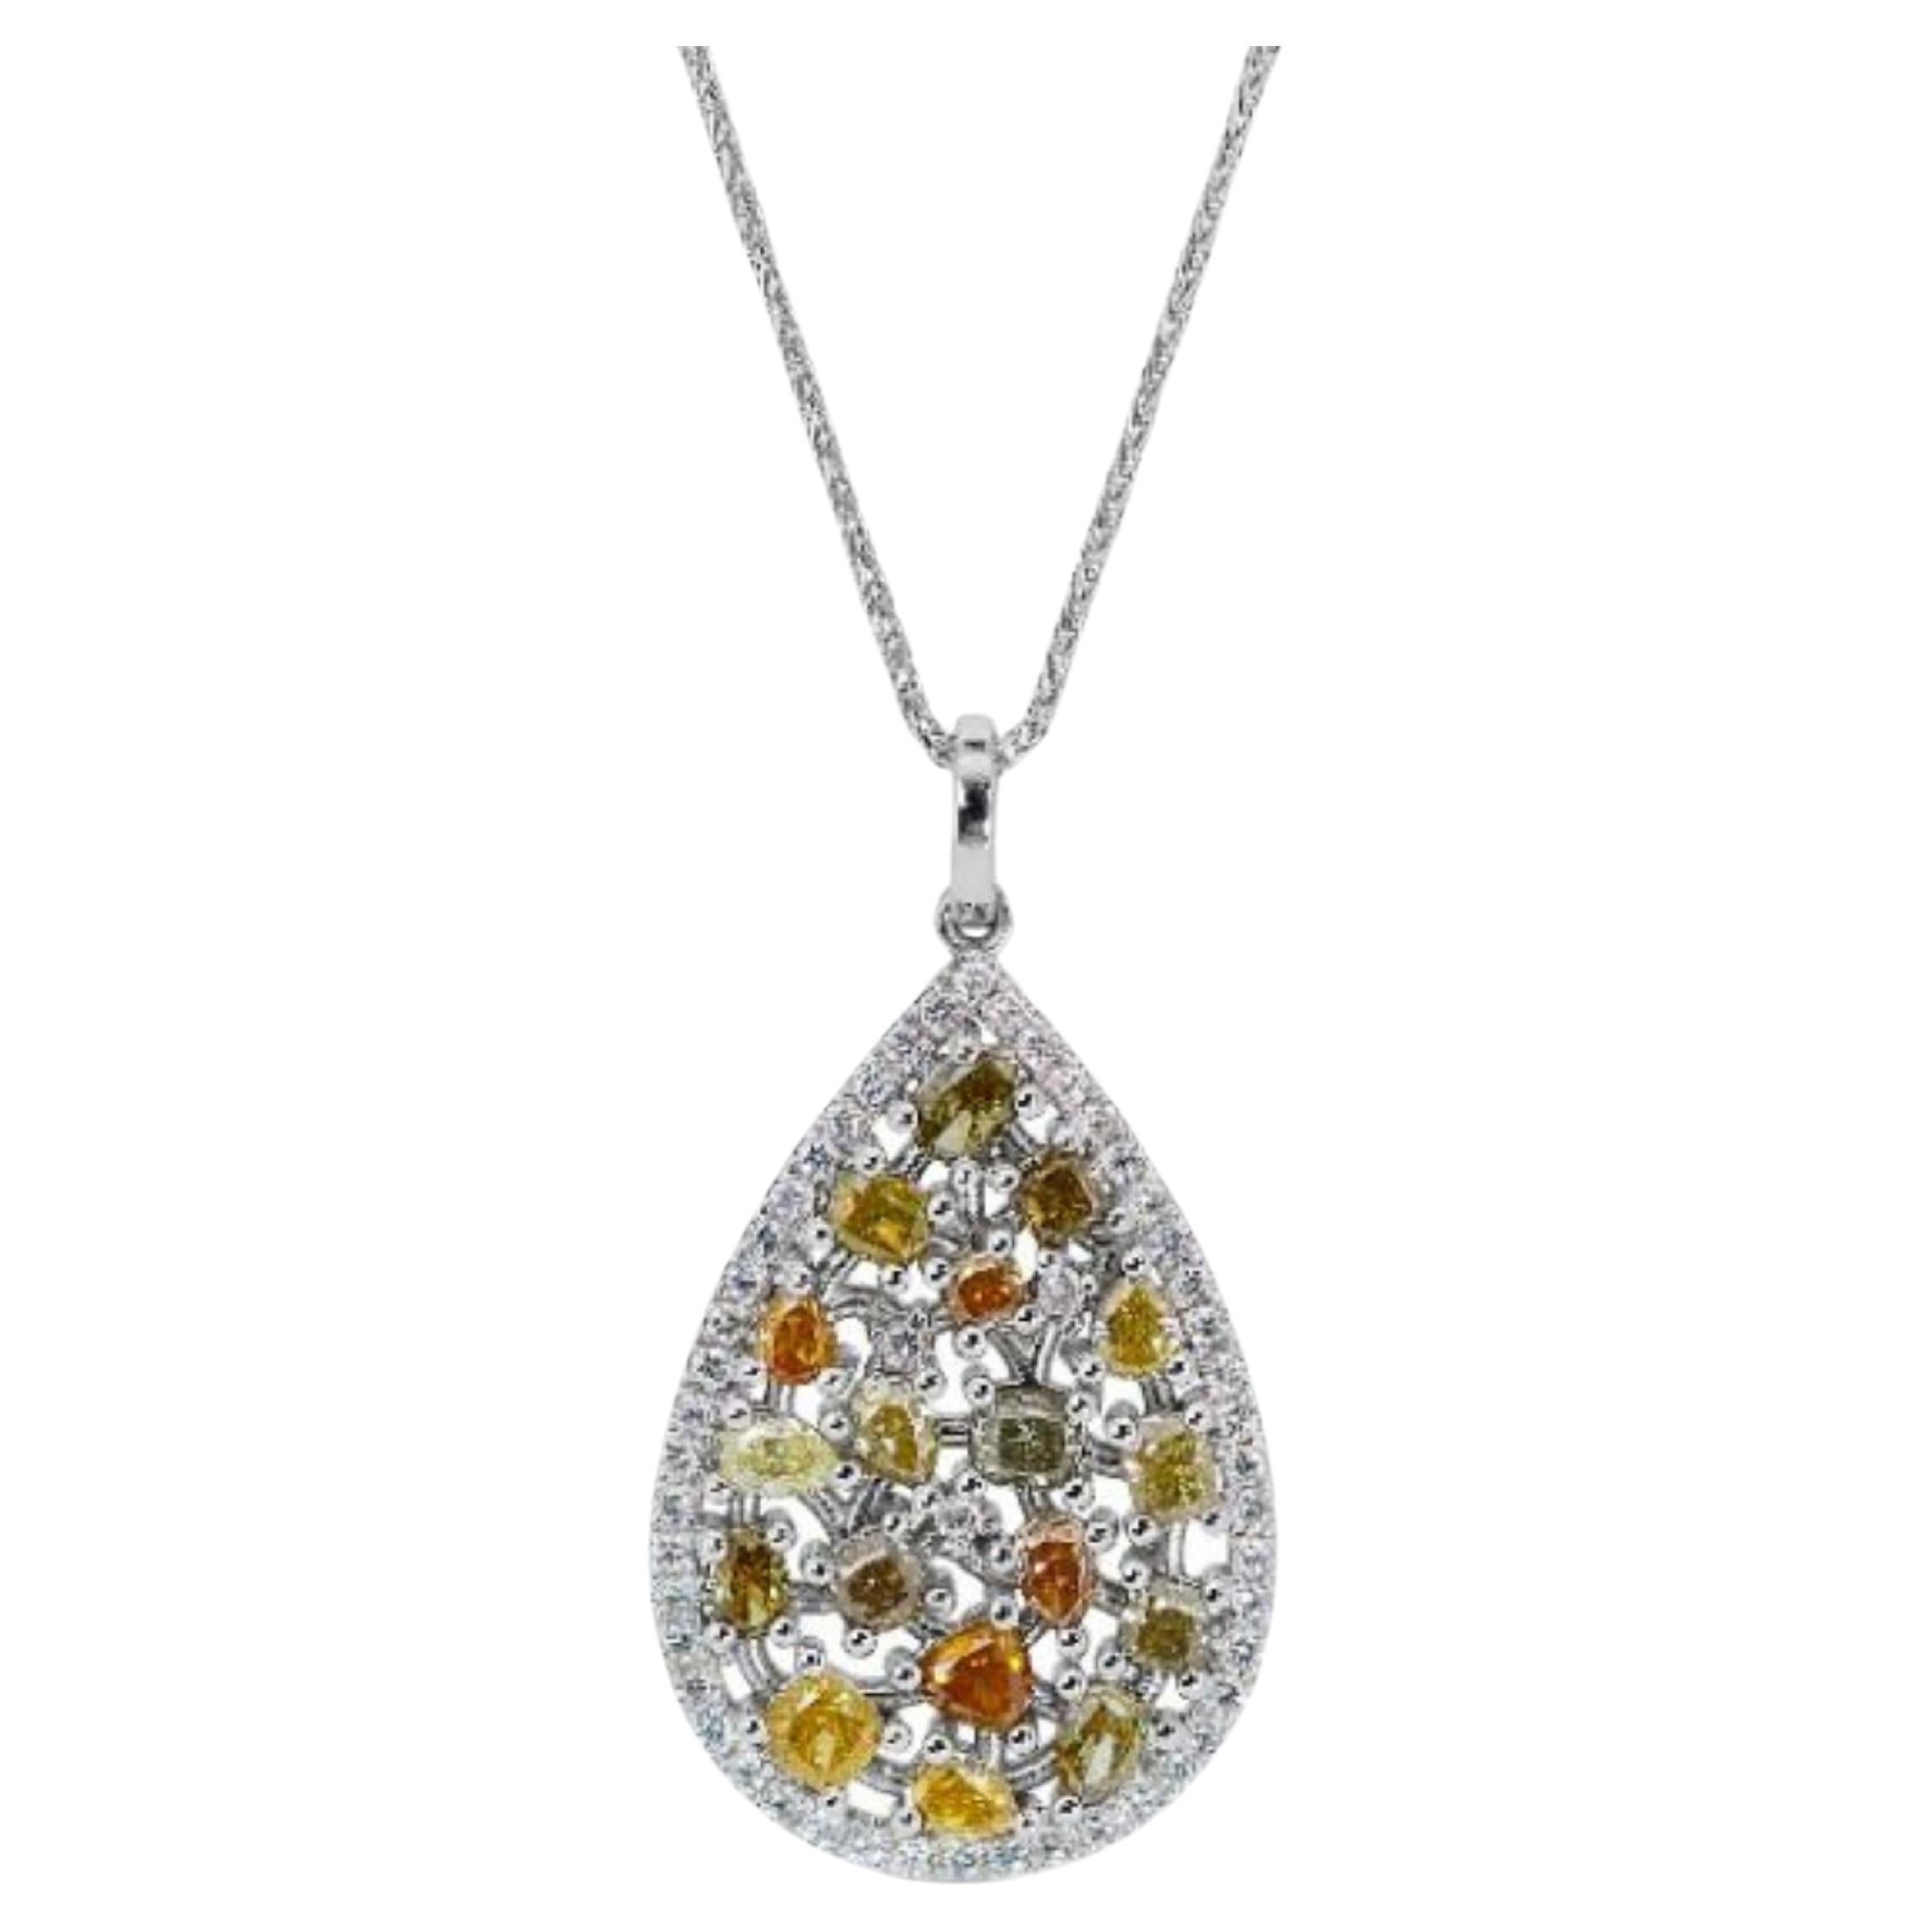 Glamorous 2.17ct. Mixed Cut Stud Diamond Necklace For Sale